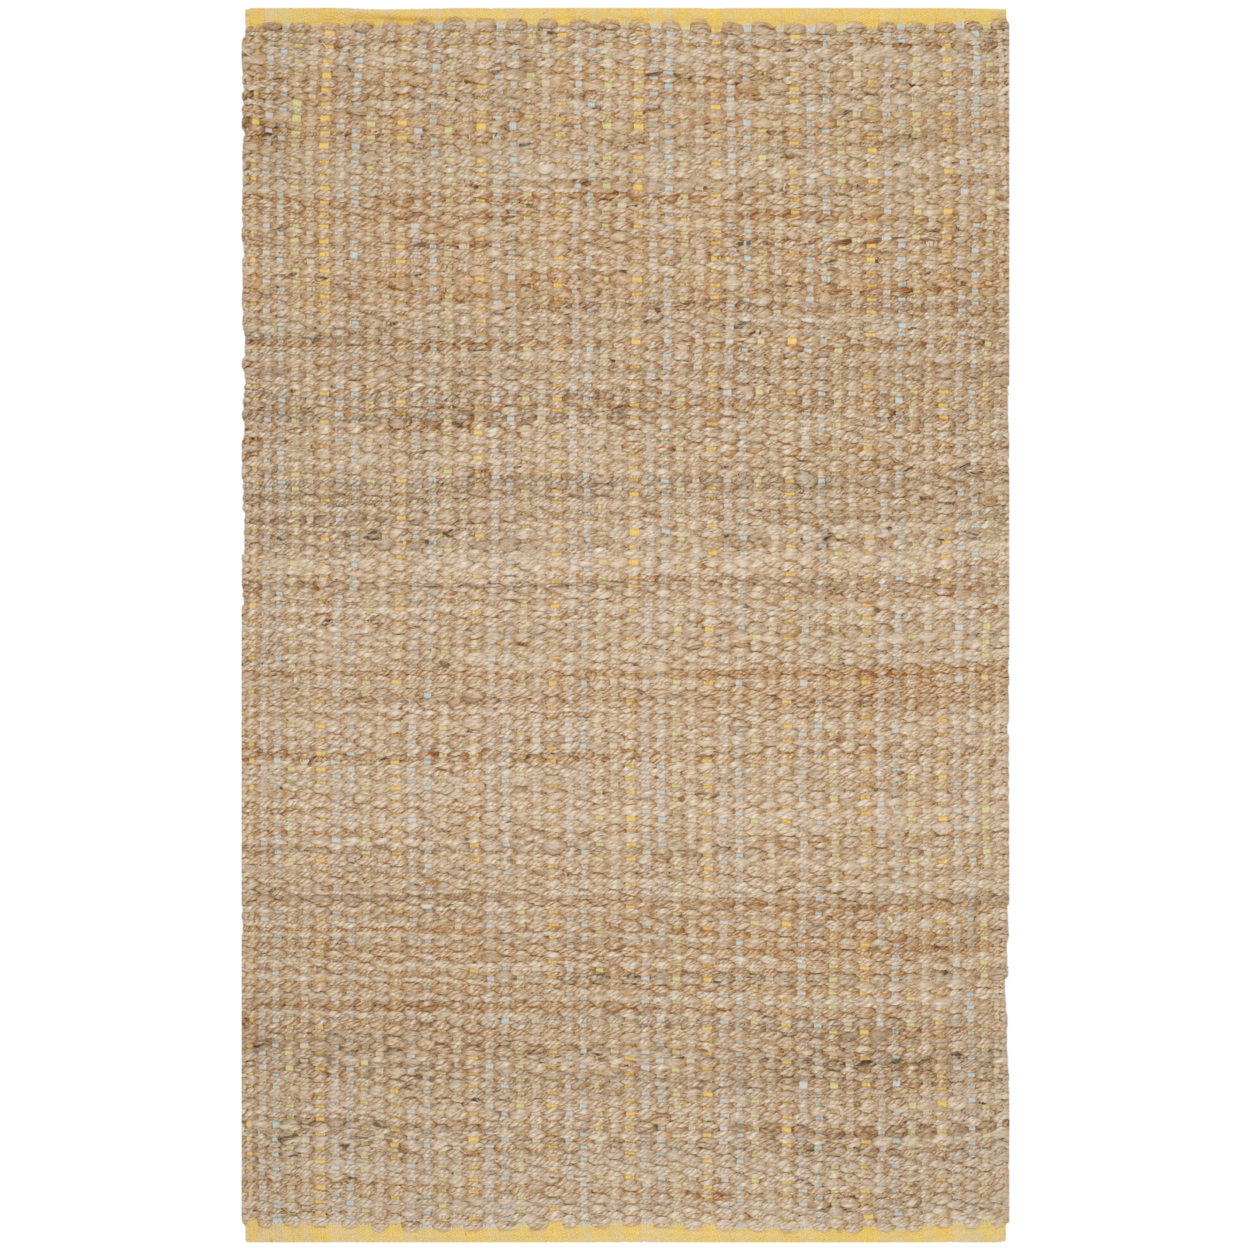 SAFAVIEH Cape Cod Collection CAP811A Handwoven Yellow Rug - 4' X 6'